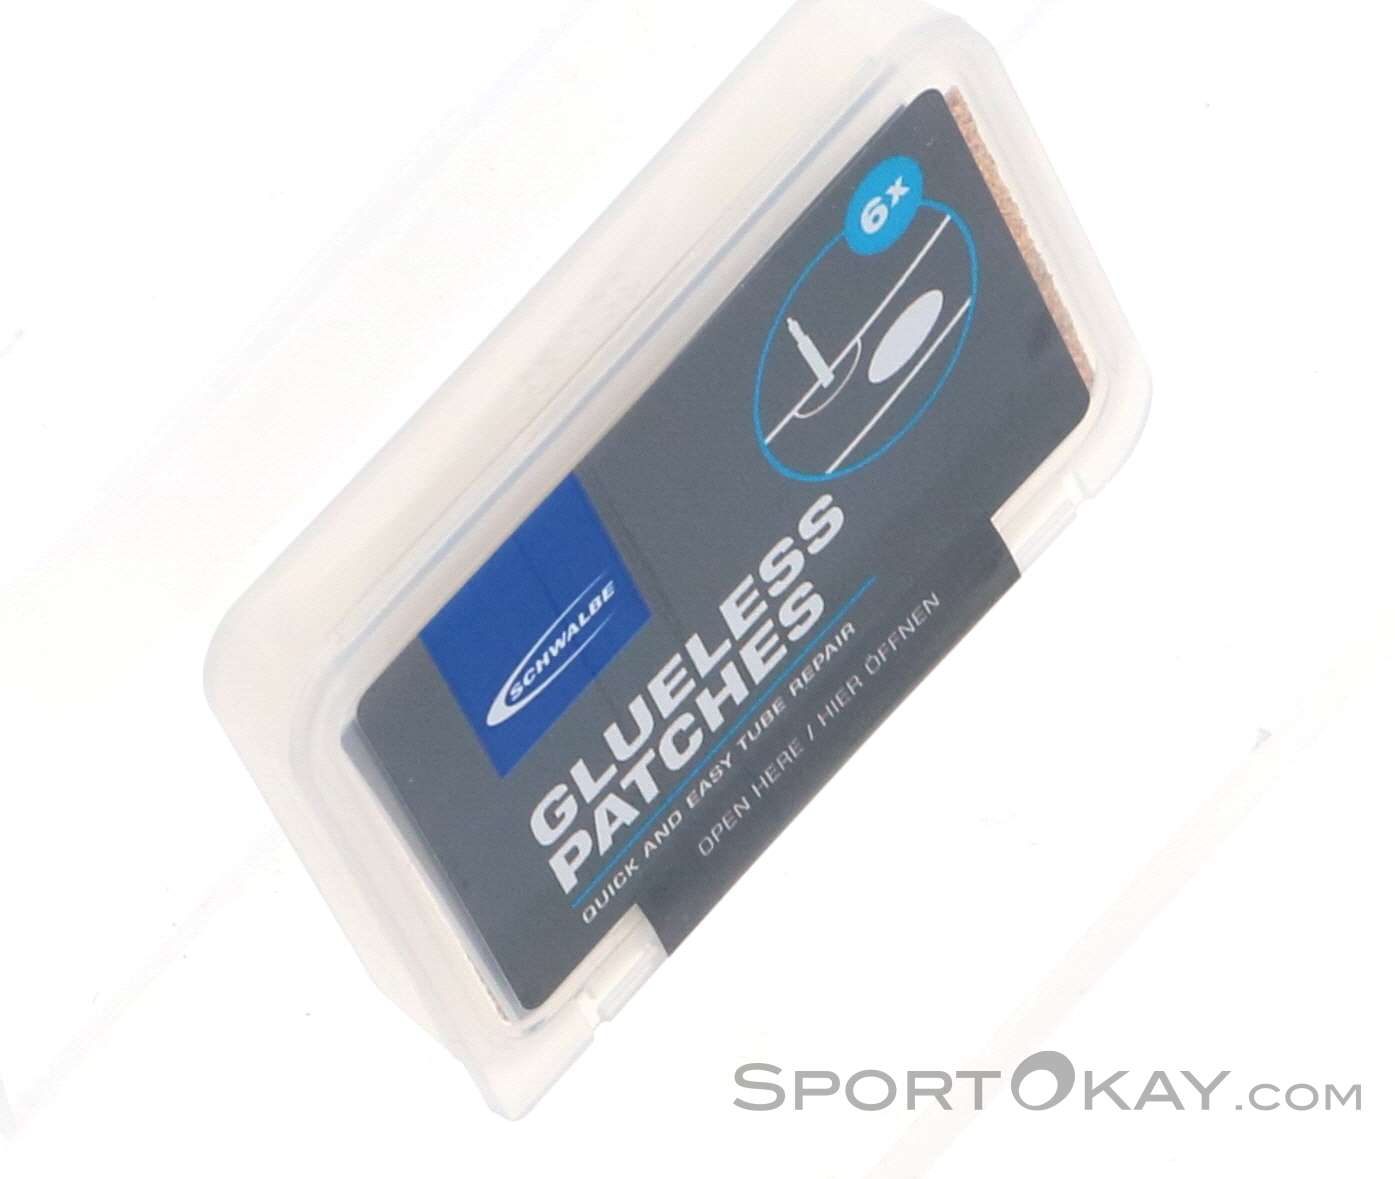 Schwalbe Glueless Patches Patch Kit - Tire Repair Kits - Tools & Care -  Bike - All